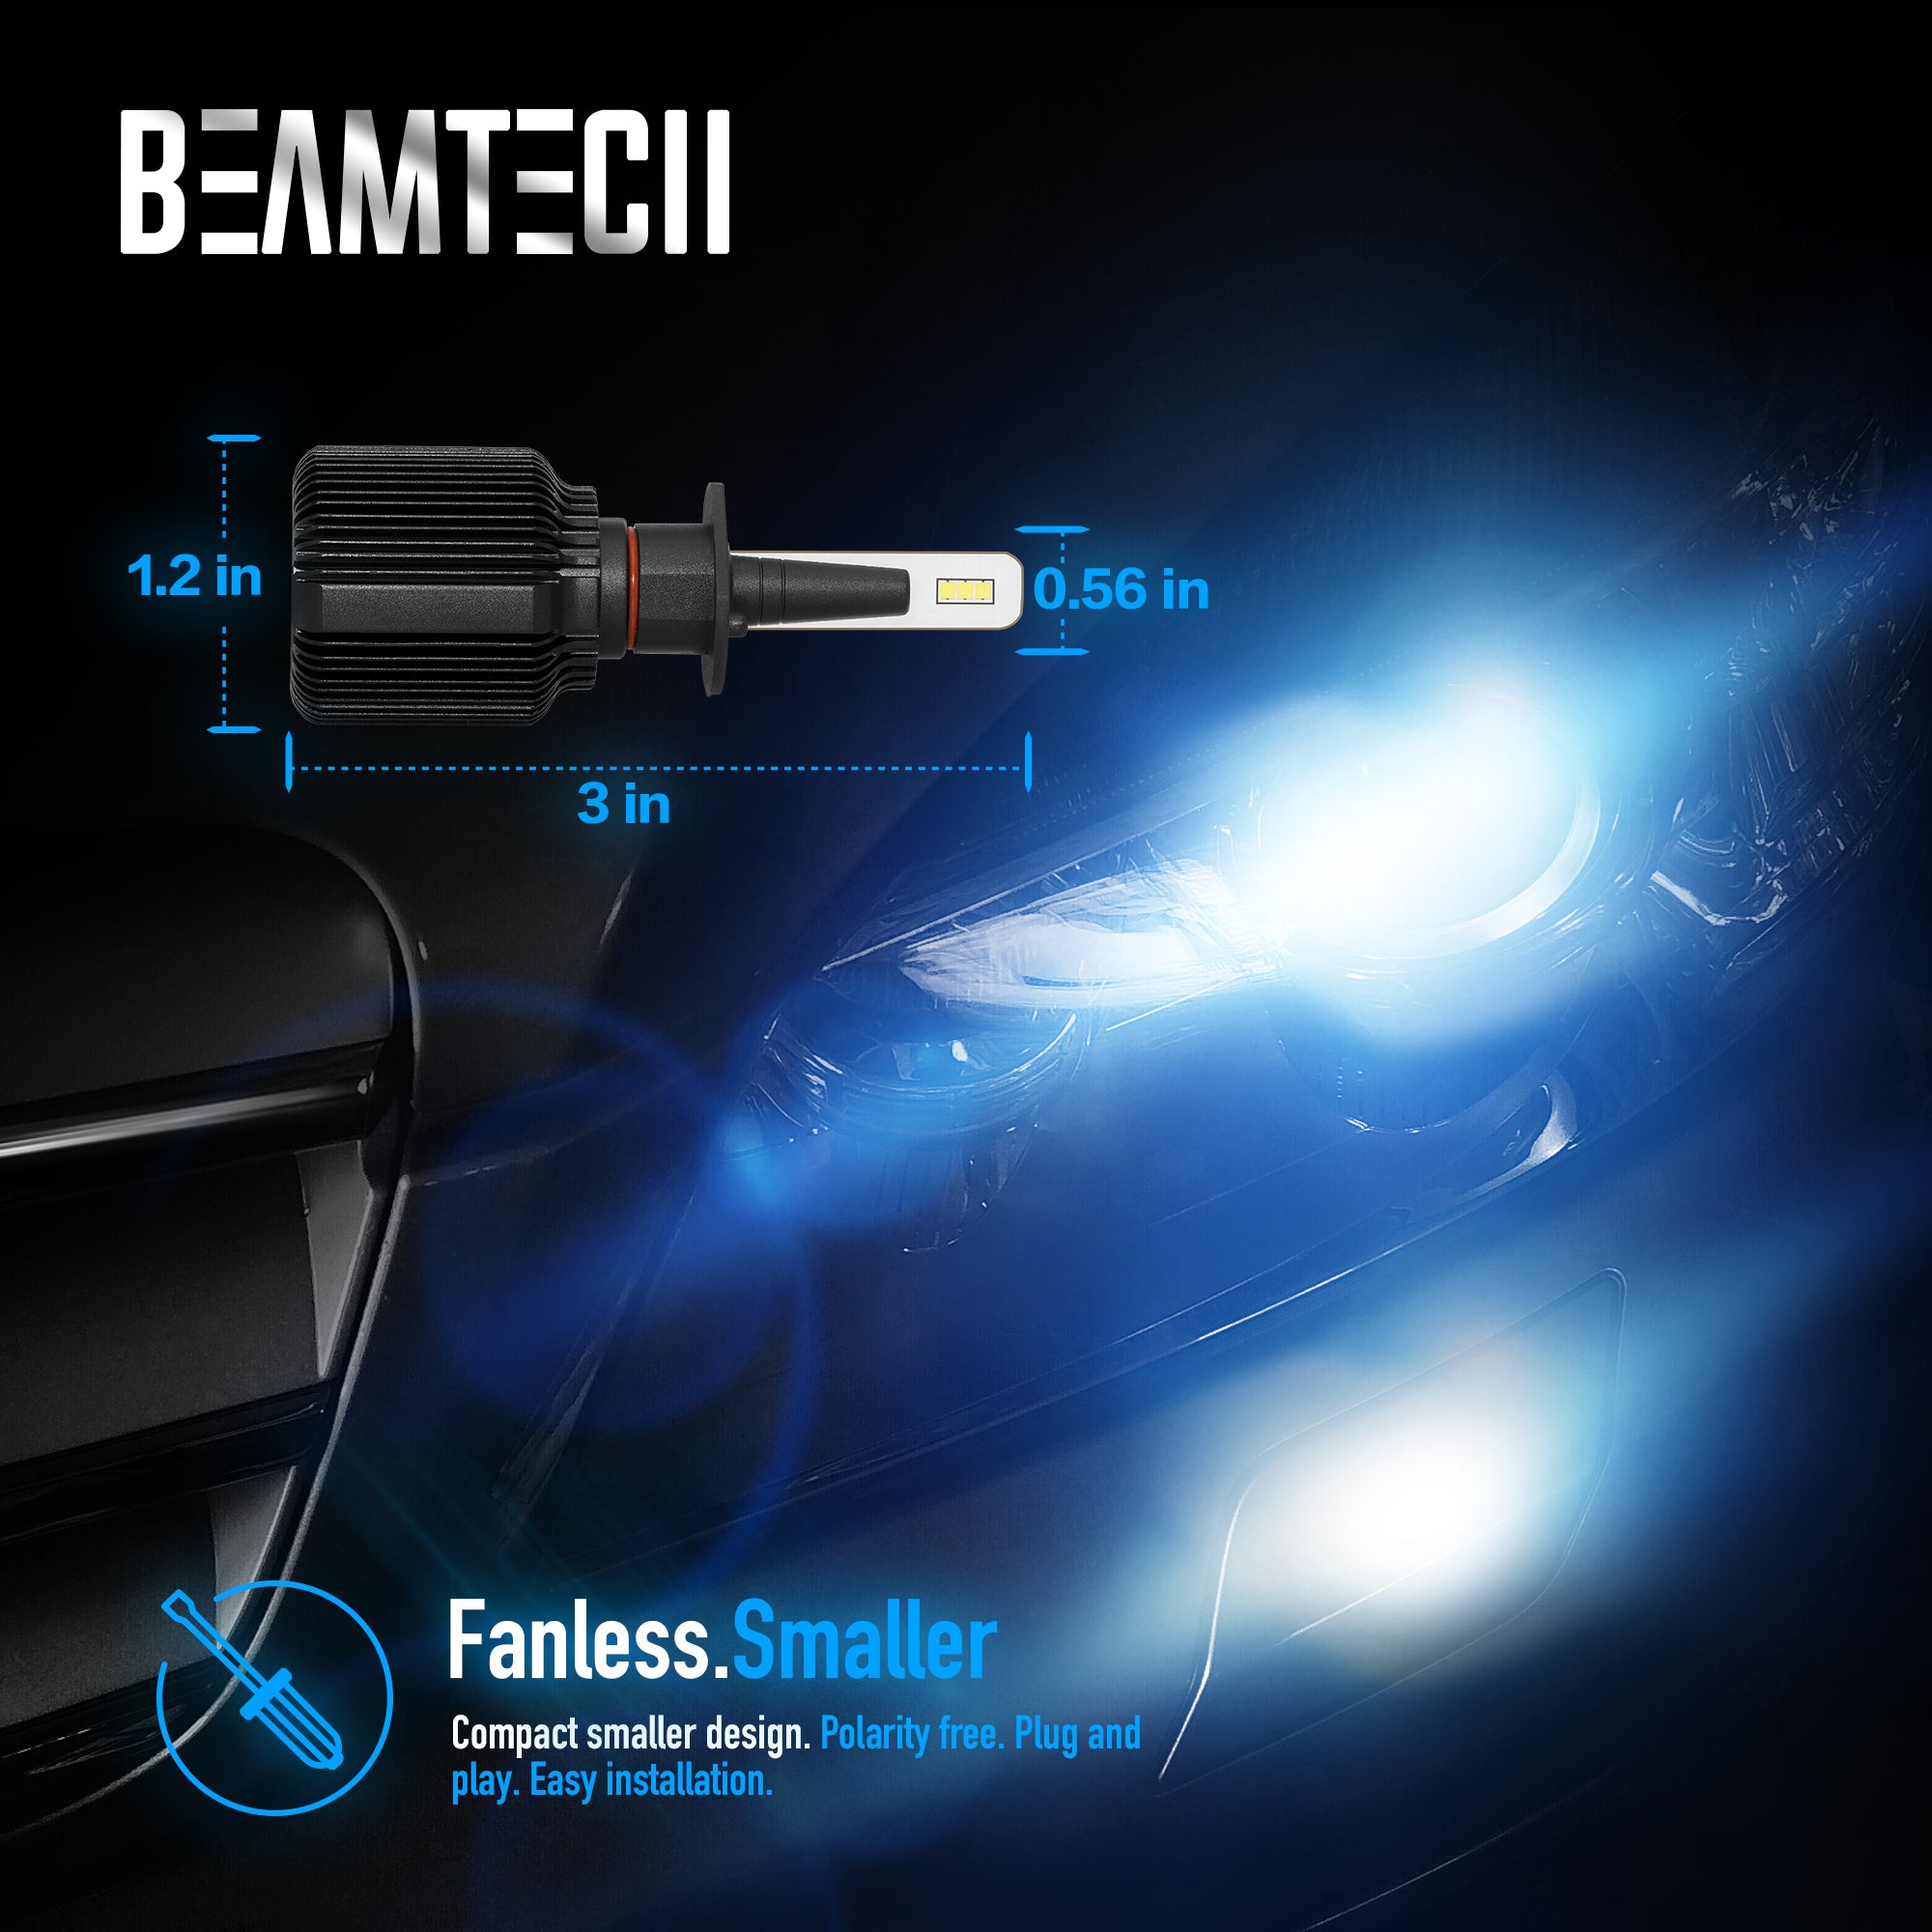 BEAMTECH H1 LED Bulb Fanless CSP Y19 Chips 8000 Lumens 6500K Xenon White  Extremely Bright Conversion Kit